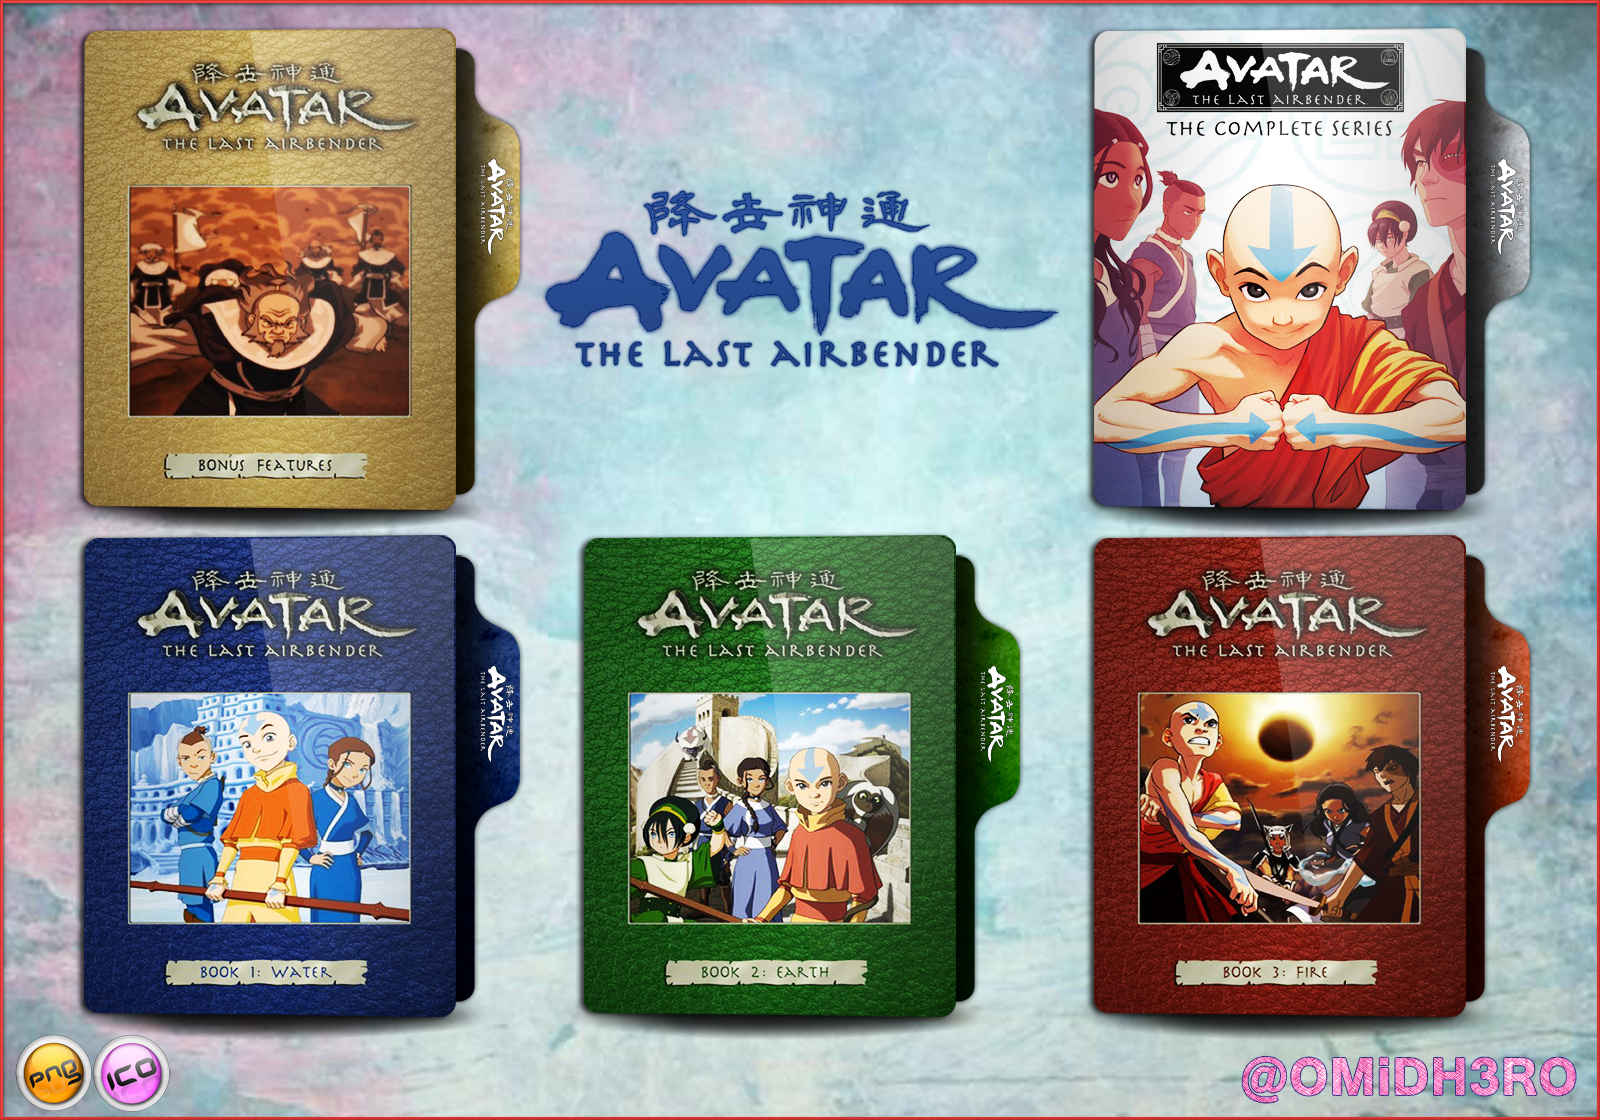 Avatar - The Last Airbender Folder Icon Pack by OMiDH3RO on DeviantArt